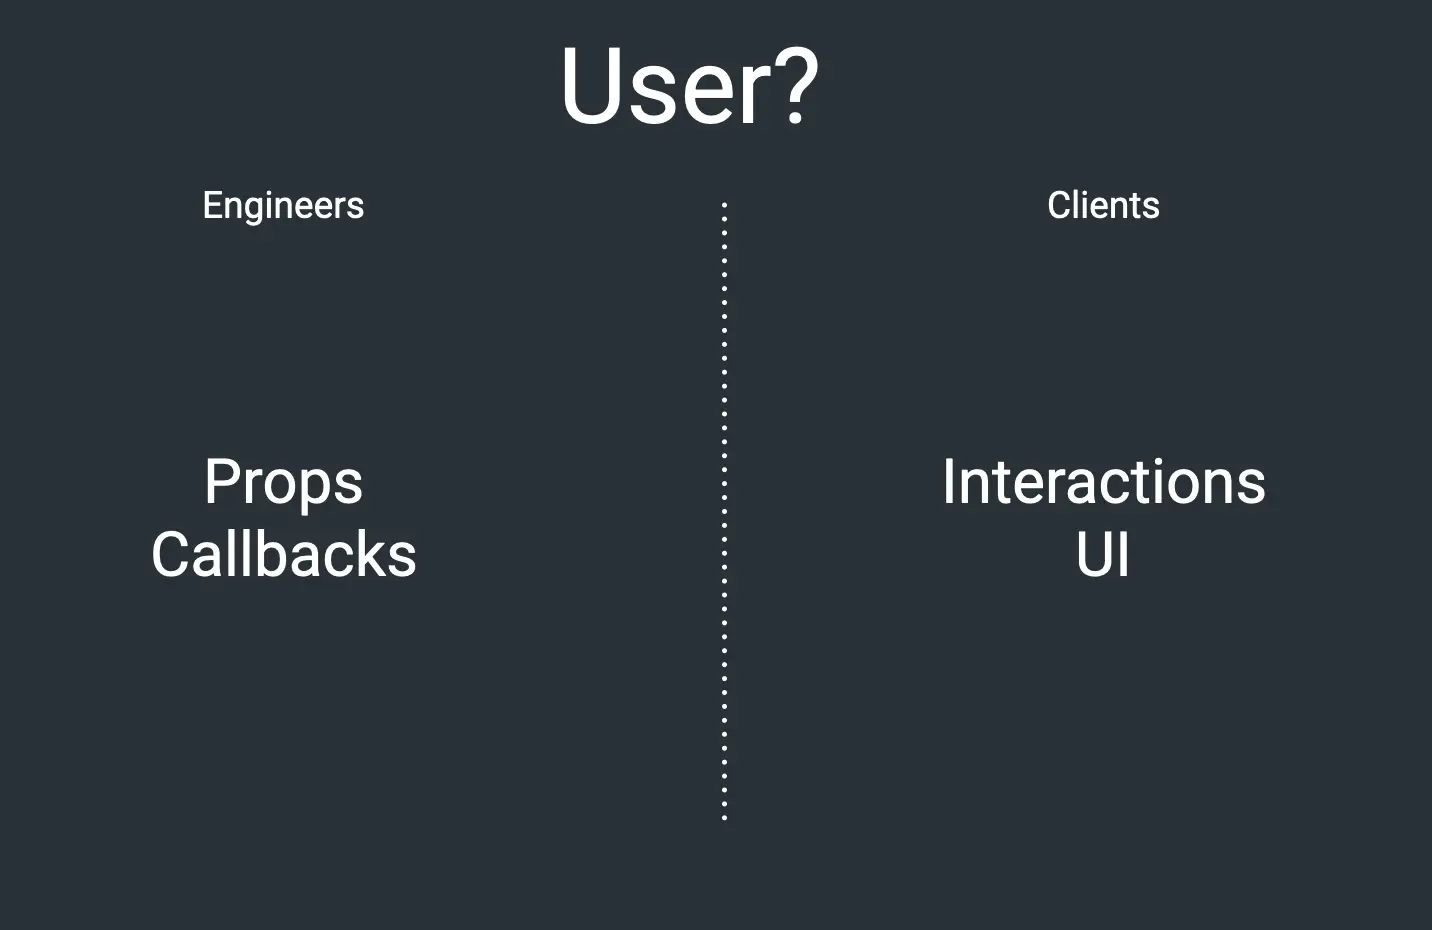 Different usage types, engineers use API (props and callbacks), clients use interactions and view the UI